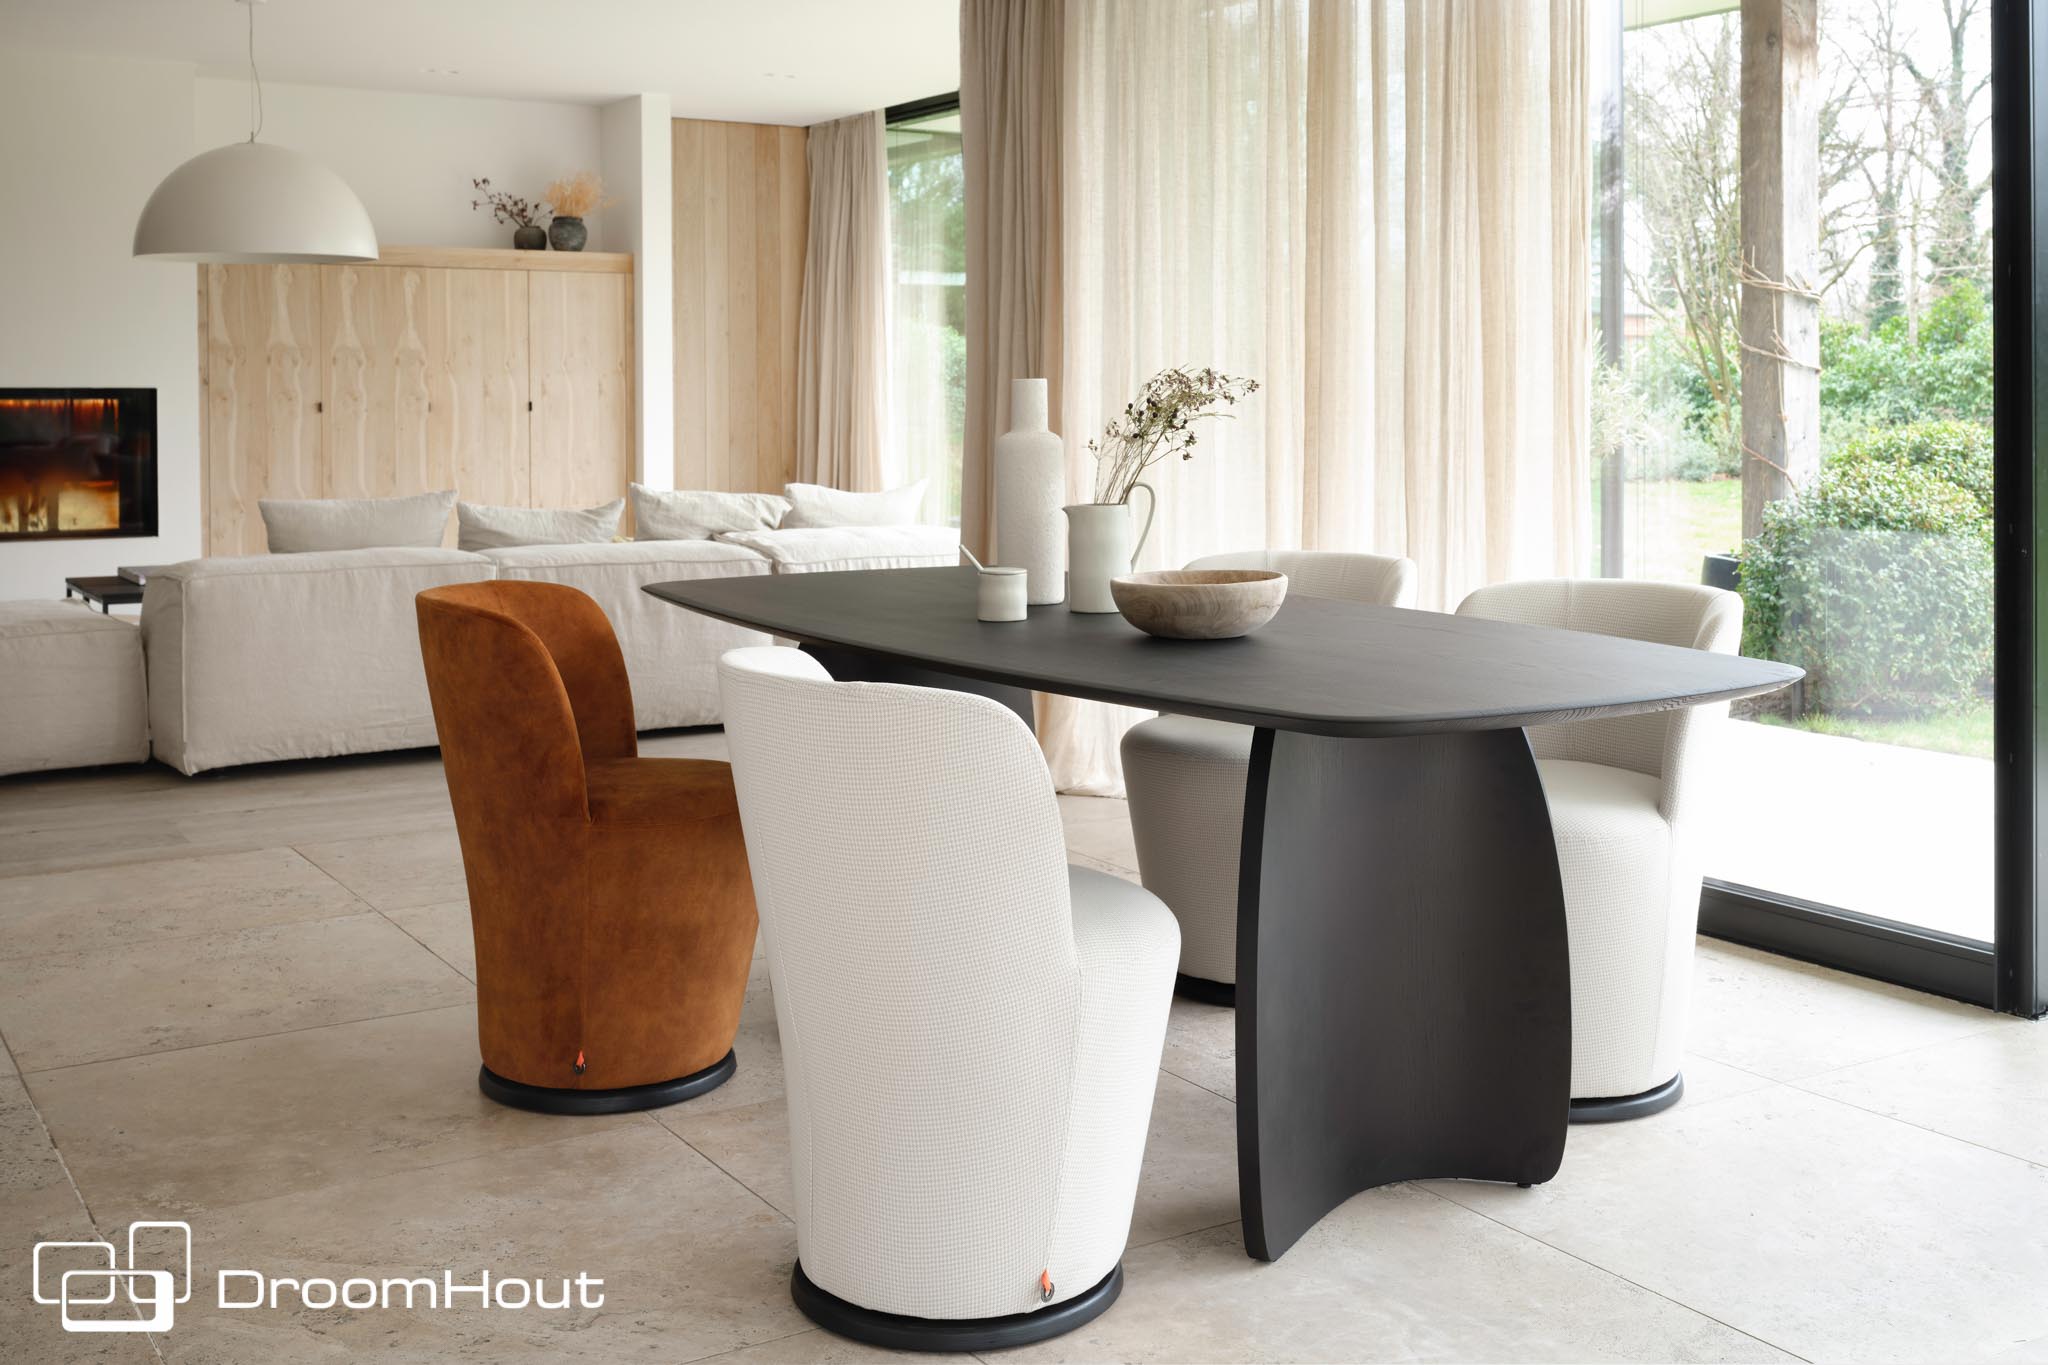 Black organic table Dolmen Mobitec by DroomHout